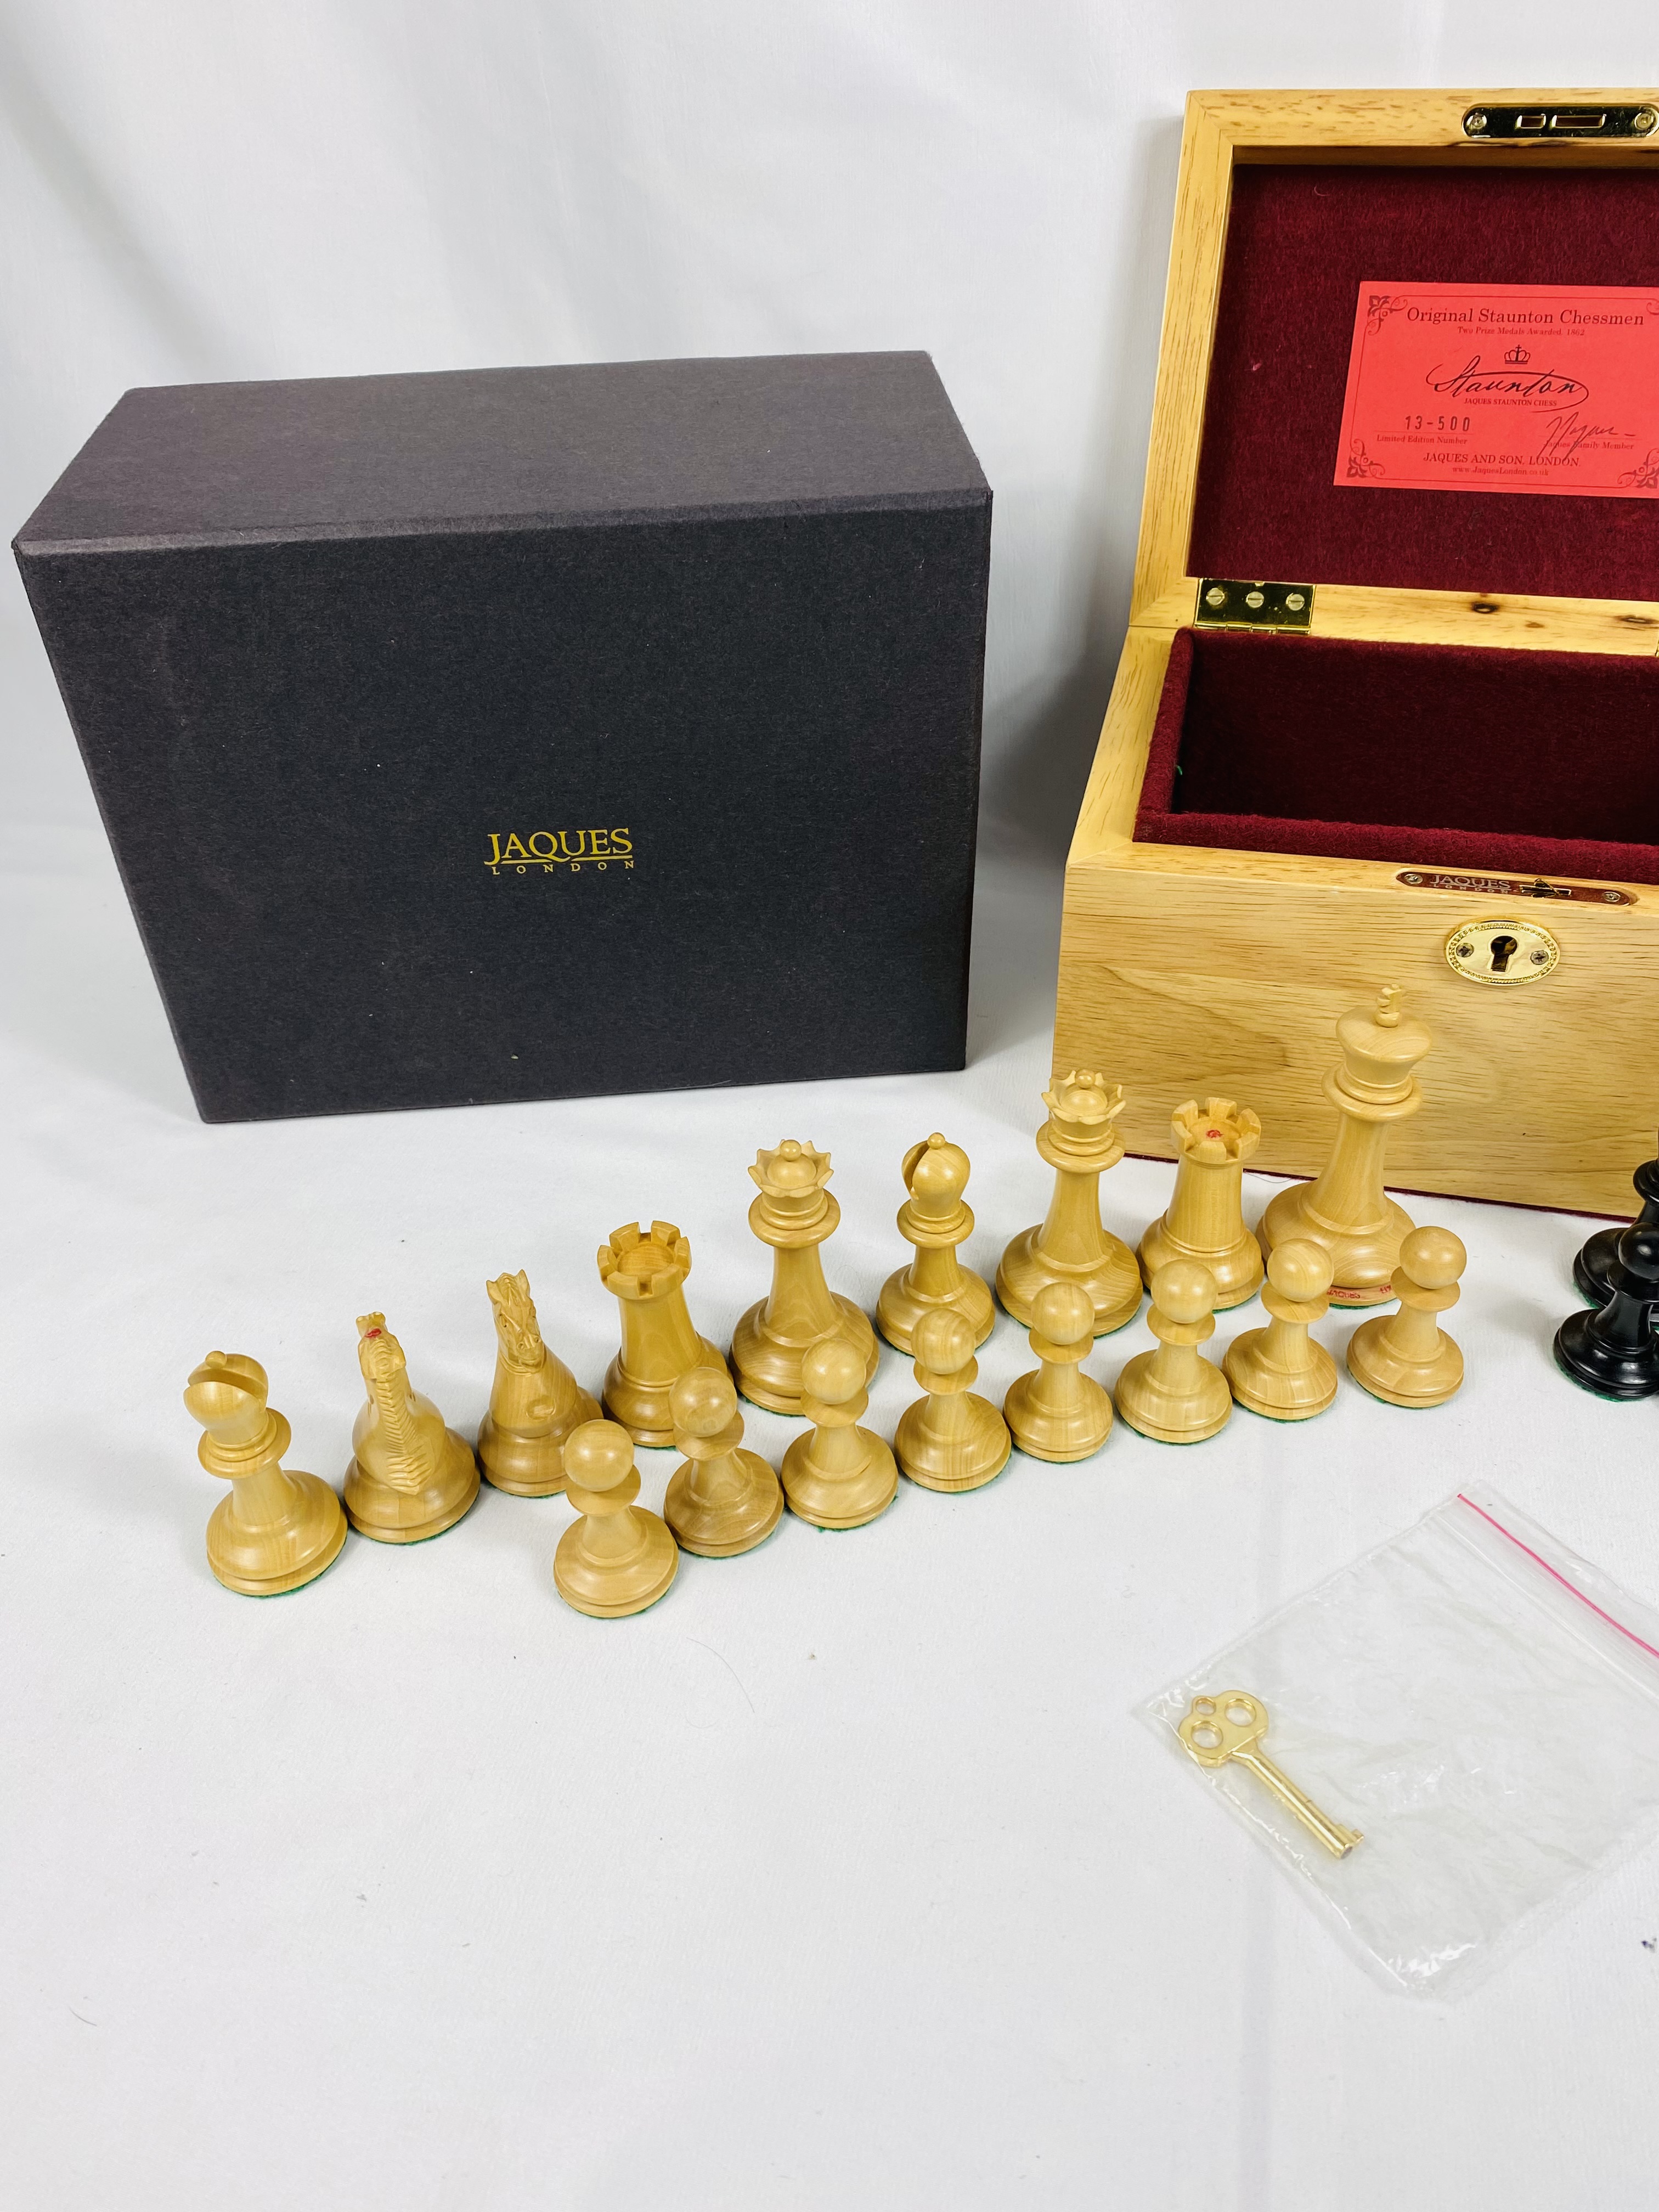 Jacque and Son Staunton limited edition chess set - Image 2 of 5